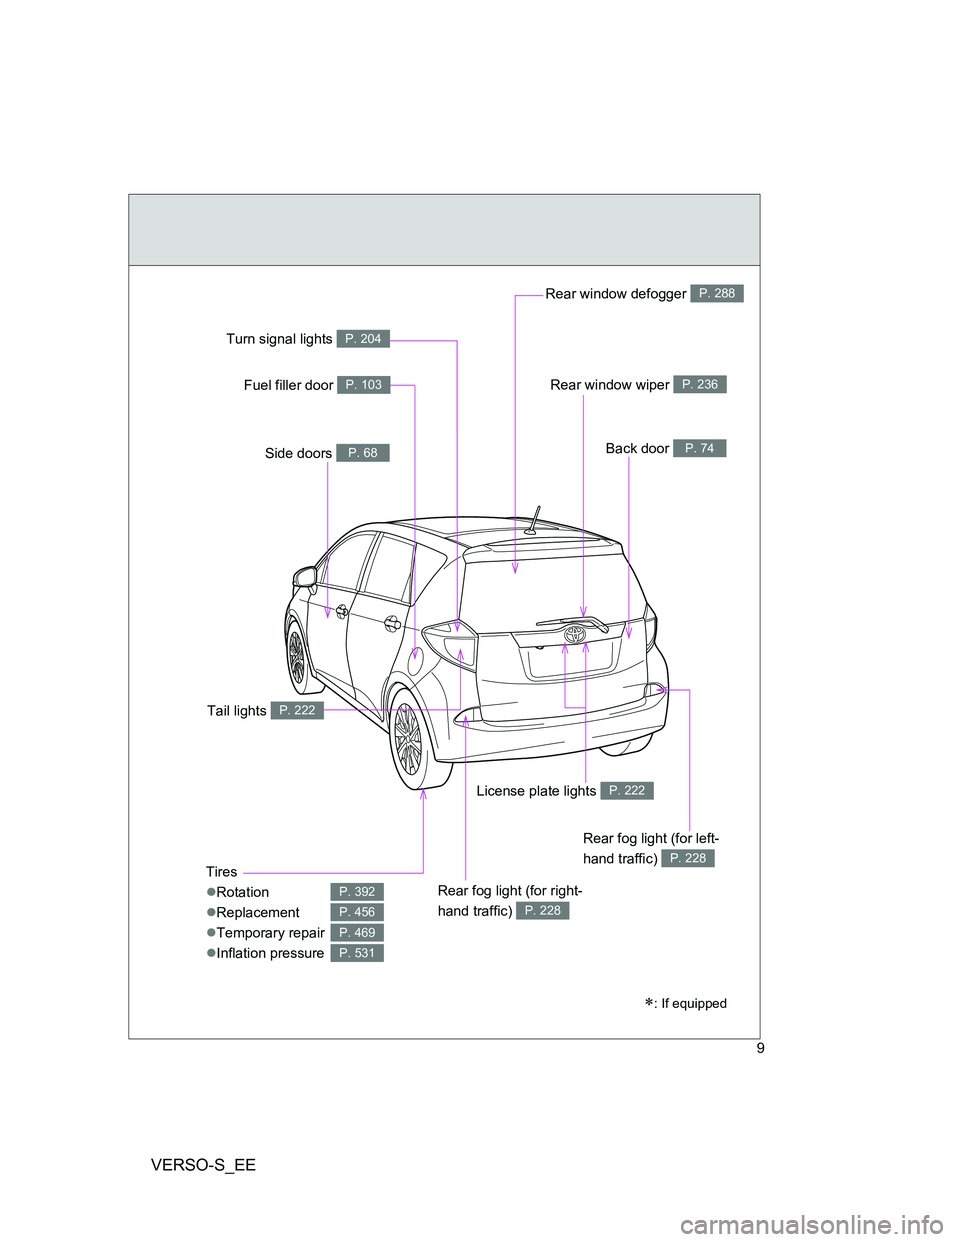 TOYOTA VERSO S 2014  Owners Manual VERSO-S_EE
9
Rear window wiper P. 236
Tires
Rotation
Replacement
Temporary repair
Inflation pressure
P. 392
P. 456
P. 469
P. 531
Back door P. 74Side doors P. 68
Rear window defogger P. 288